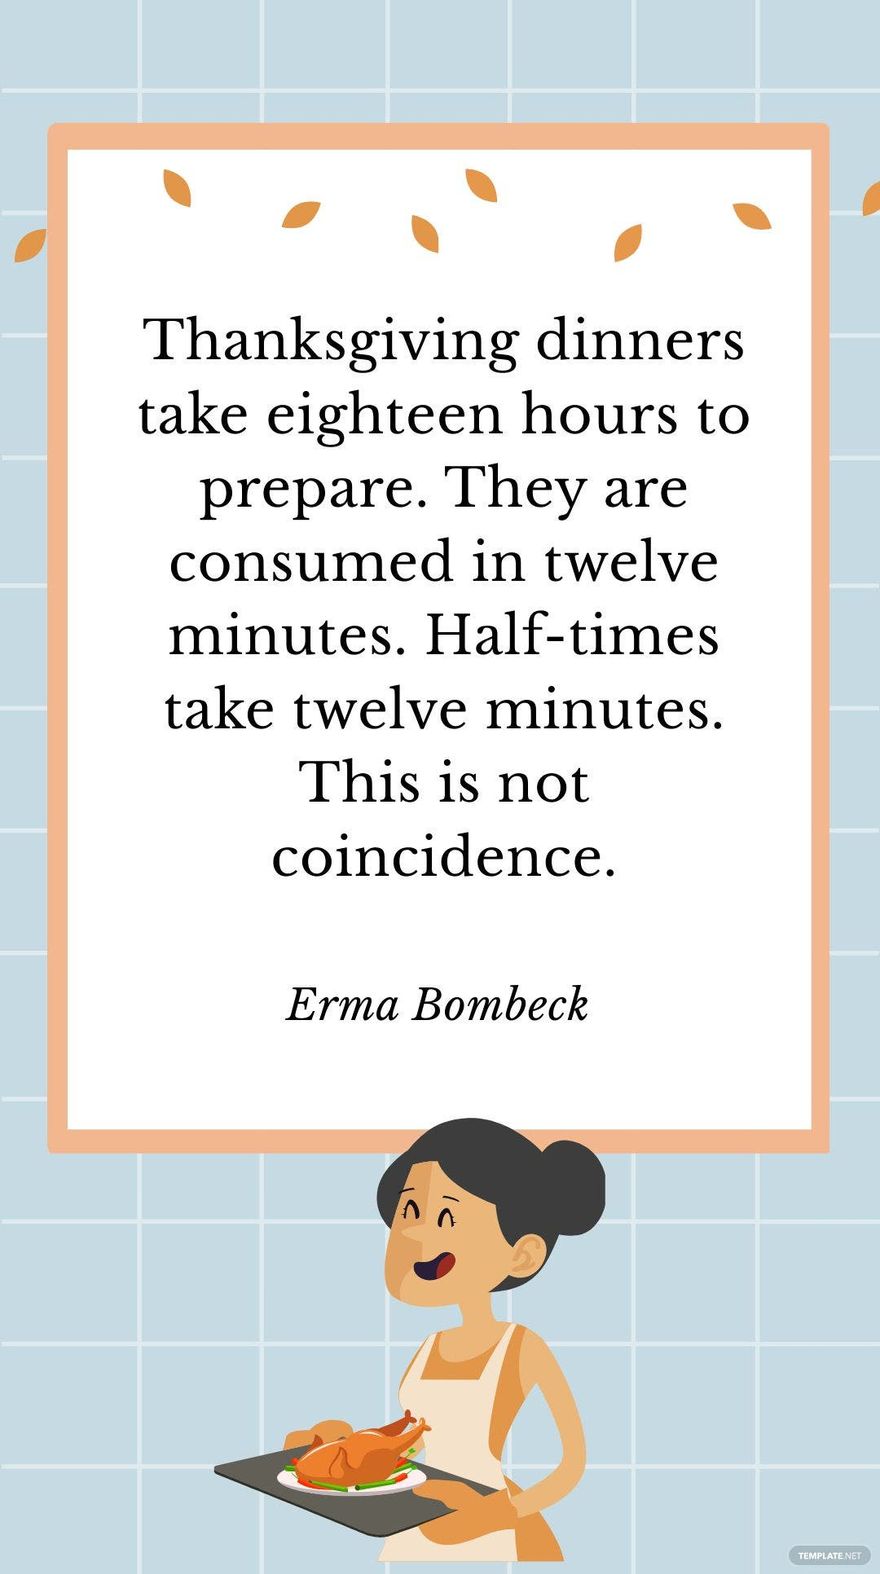 Erma Bombeck - Thanksgiving dinners take eighteen hours to prepare. They are consumed in twelve minutes. Half-times take twelve minutes. This is not coincidence.